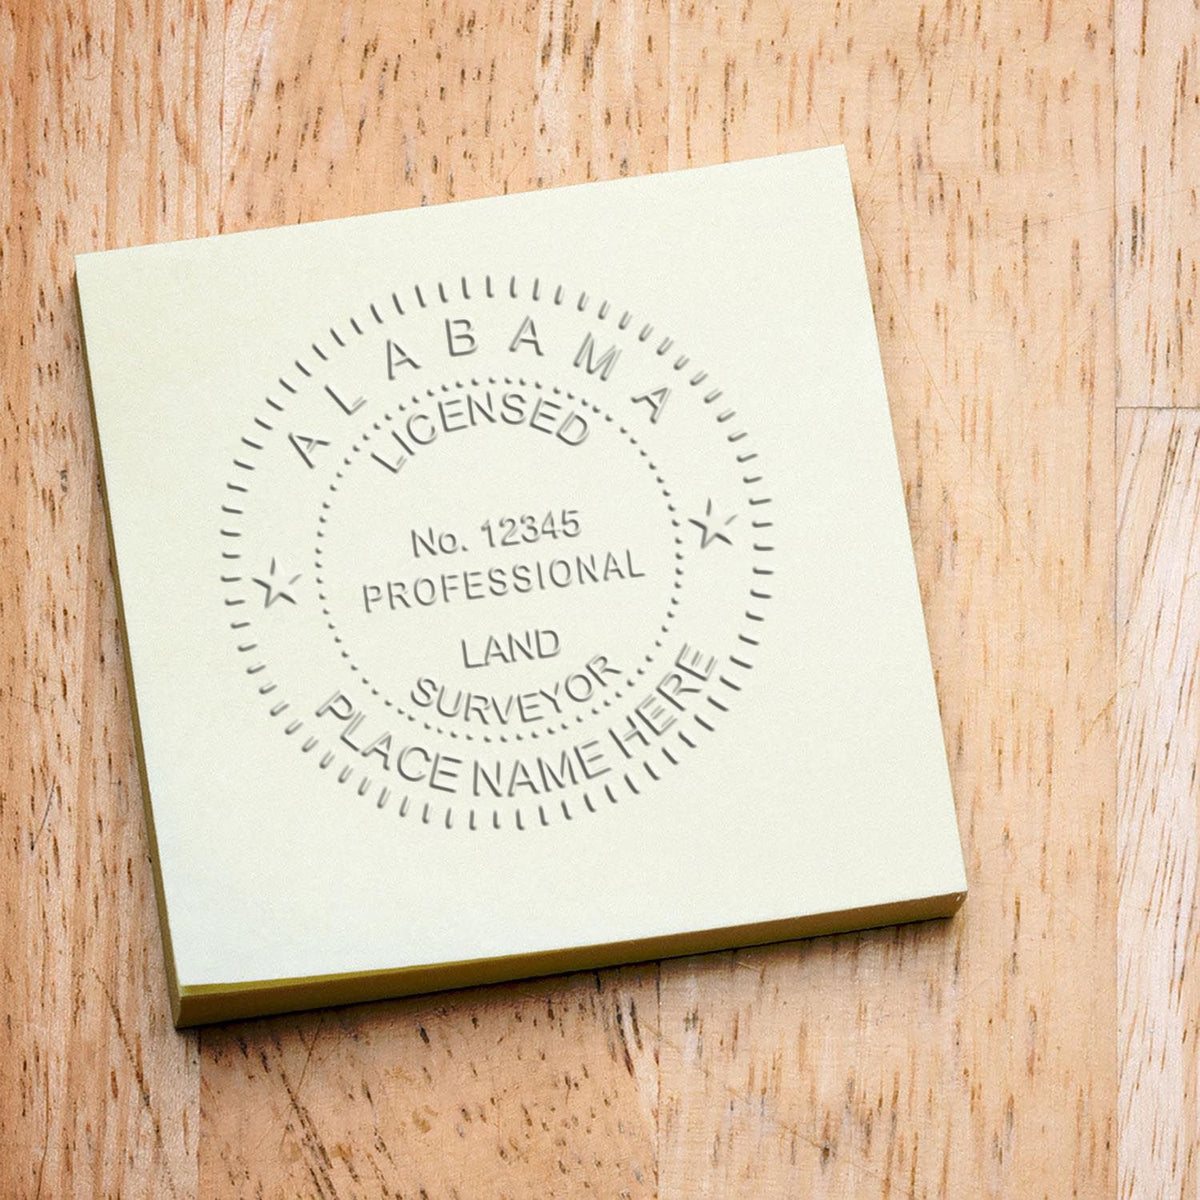 An in use photo of the Gift Alabama Land Surveyor Seal showing a sample imprint on a cardstock